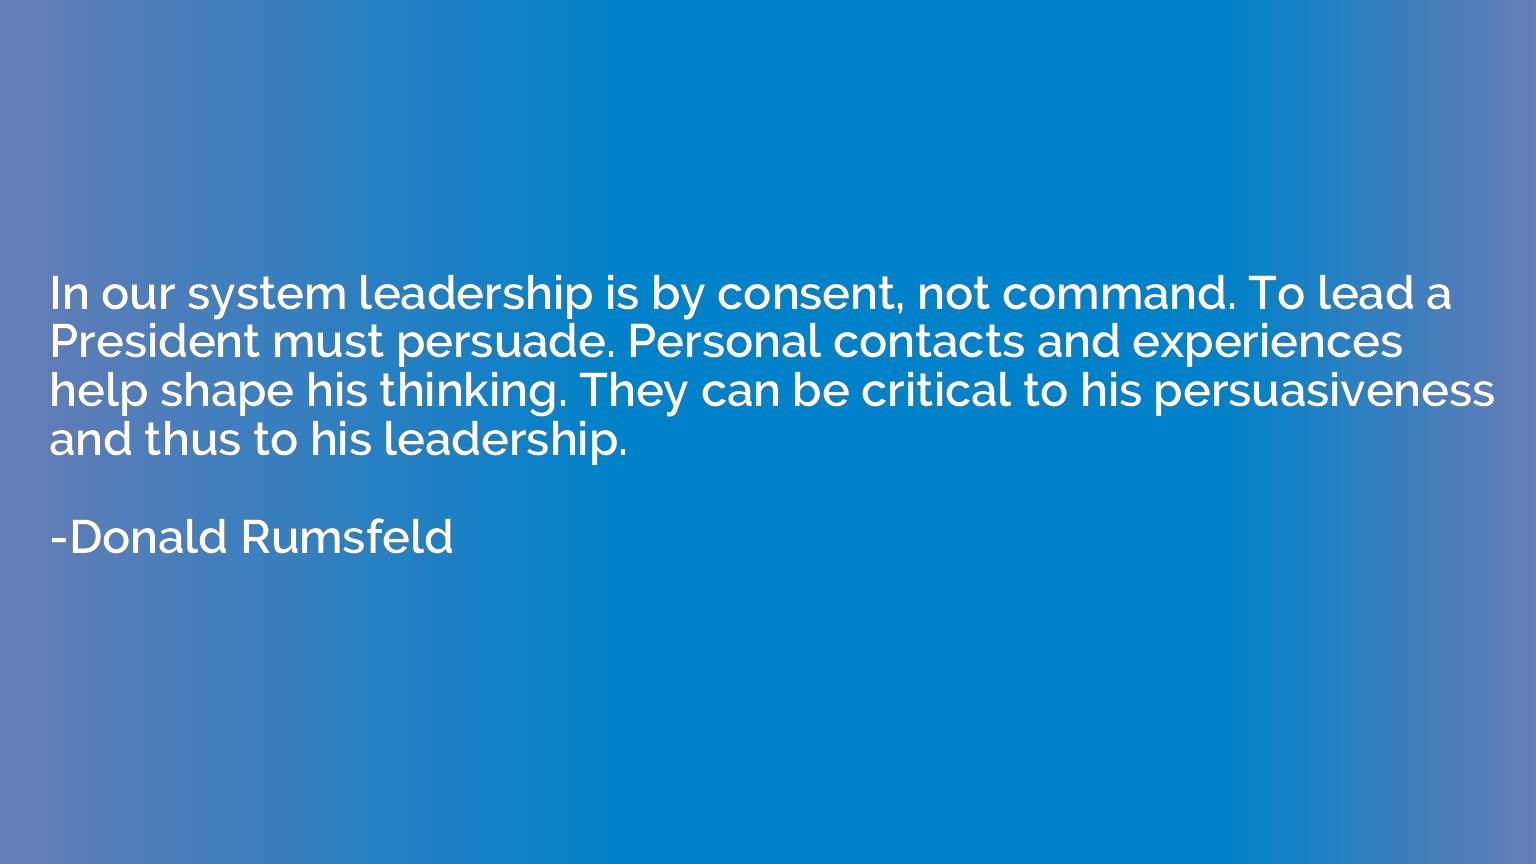 In our system leadership is by consent, not command. To lead